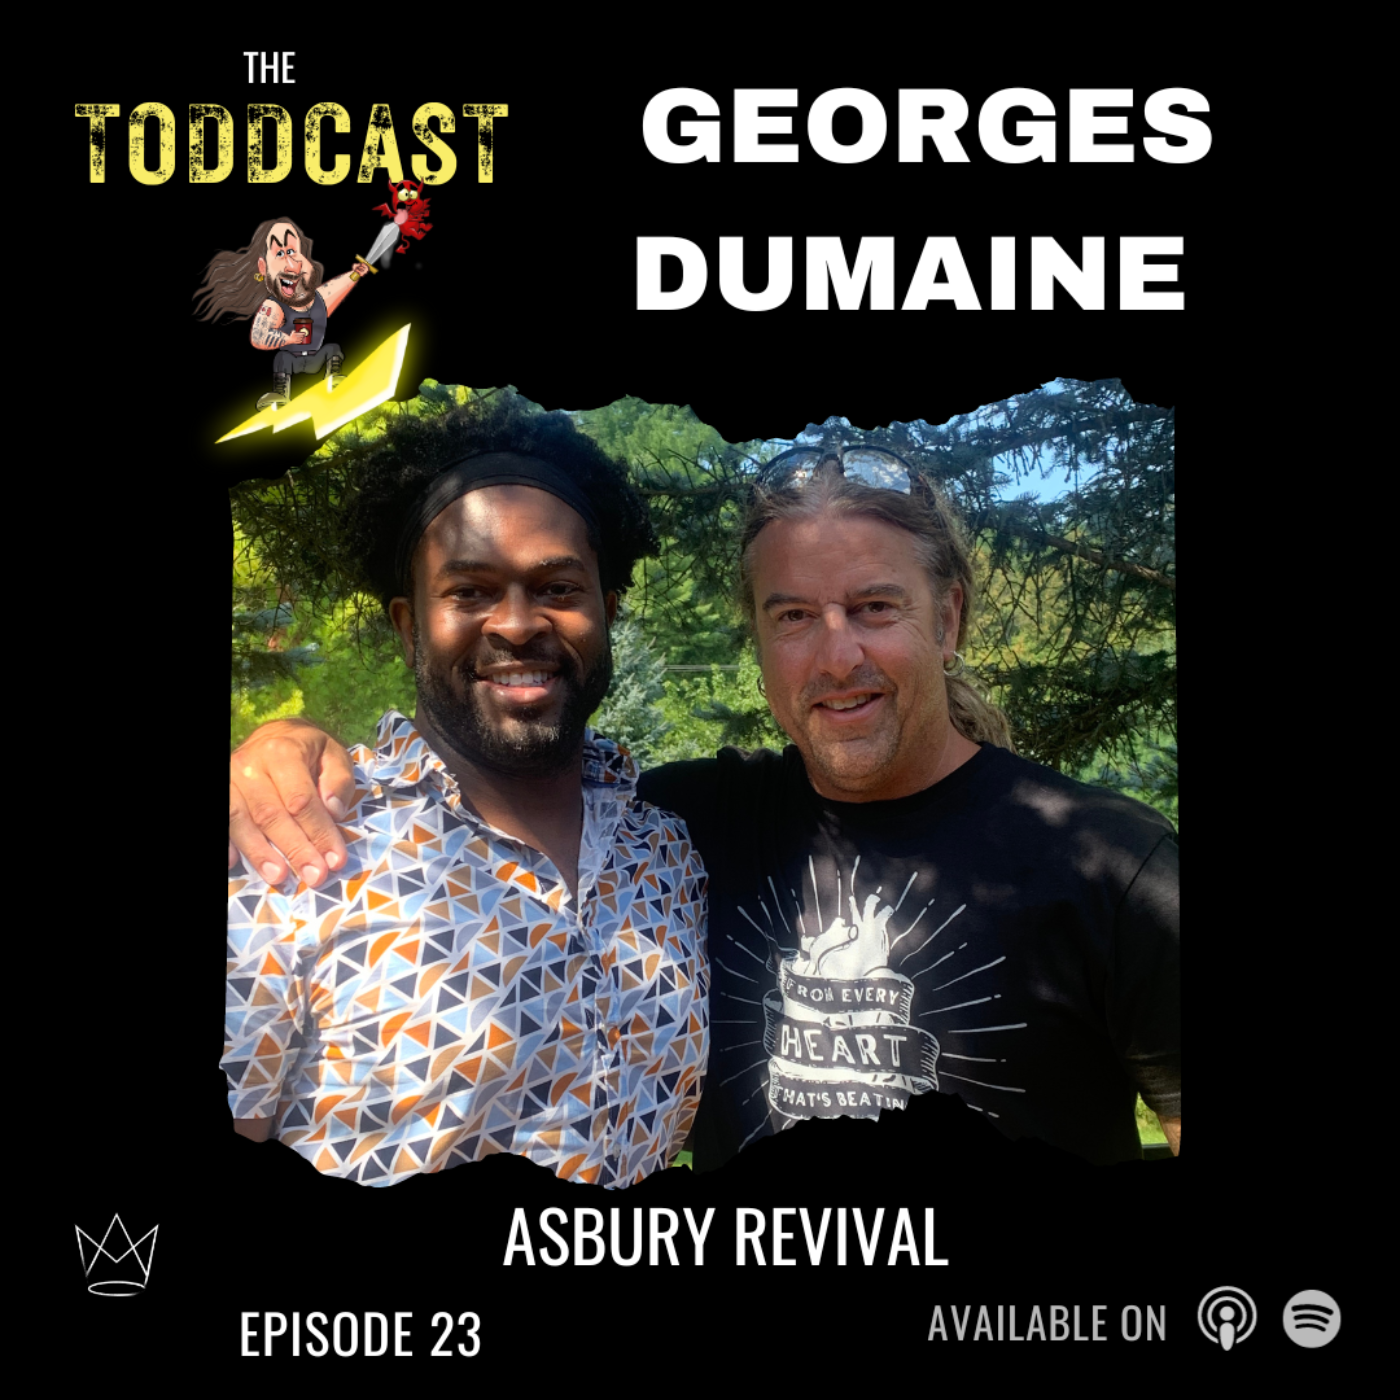 The Toddcast - Georges Dumaine (Asbury Revival)